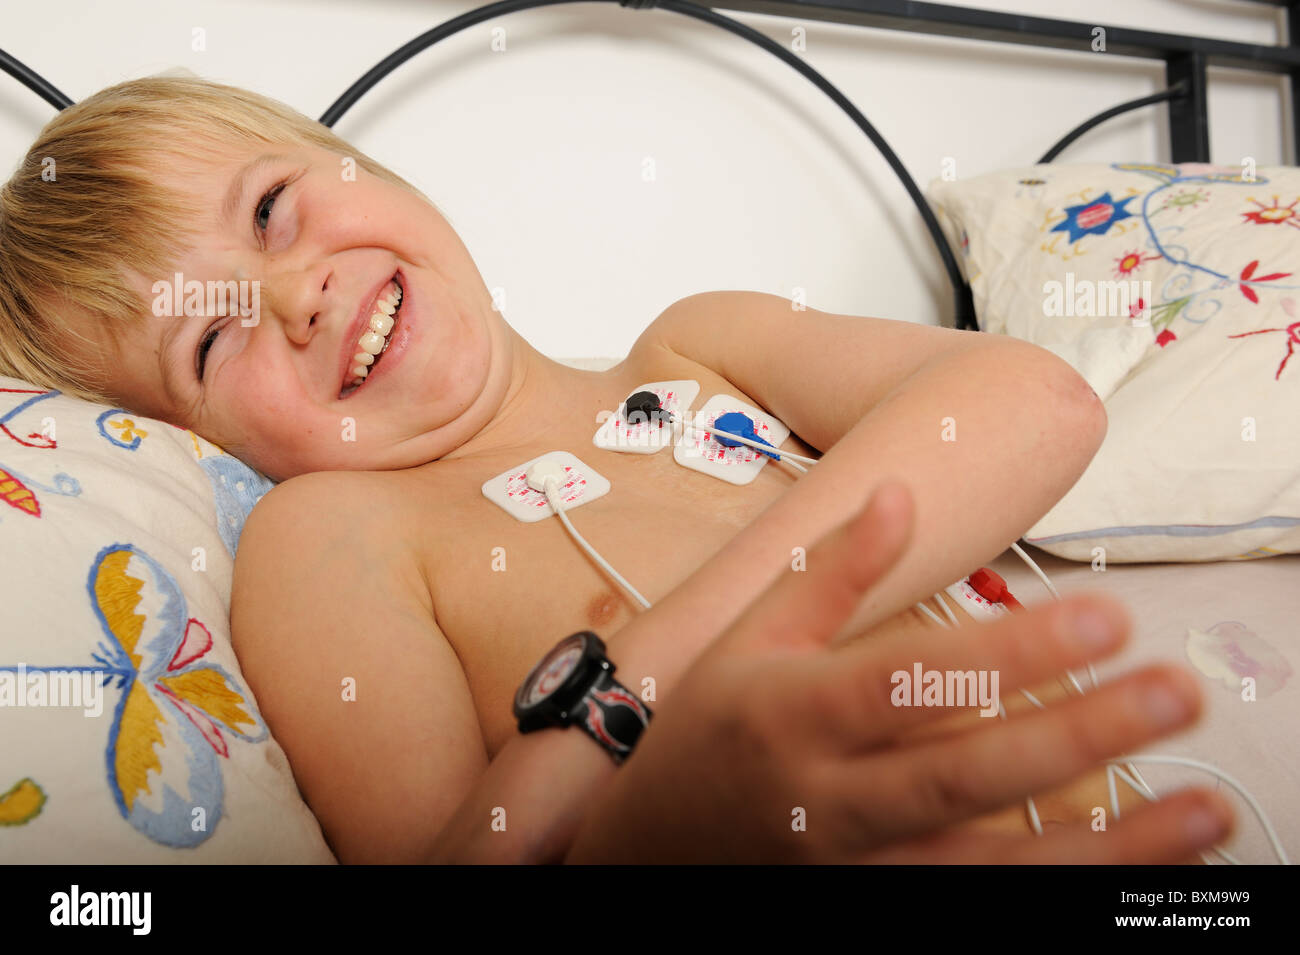 Stock photo of an 11 year old boy wearing a Holter heart monitor. Stock Photo